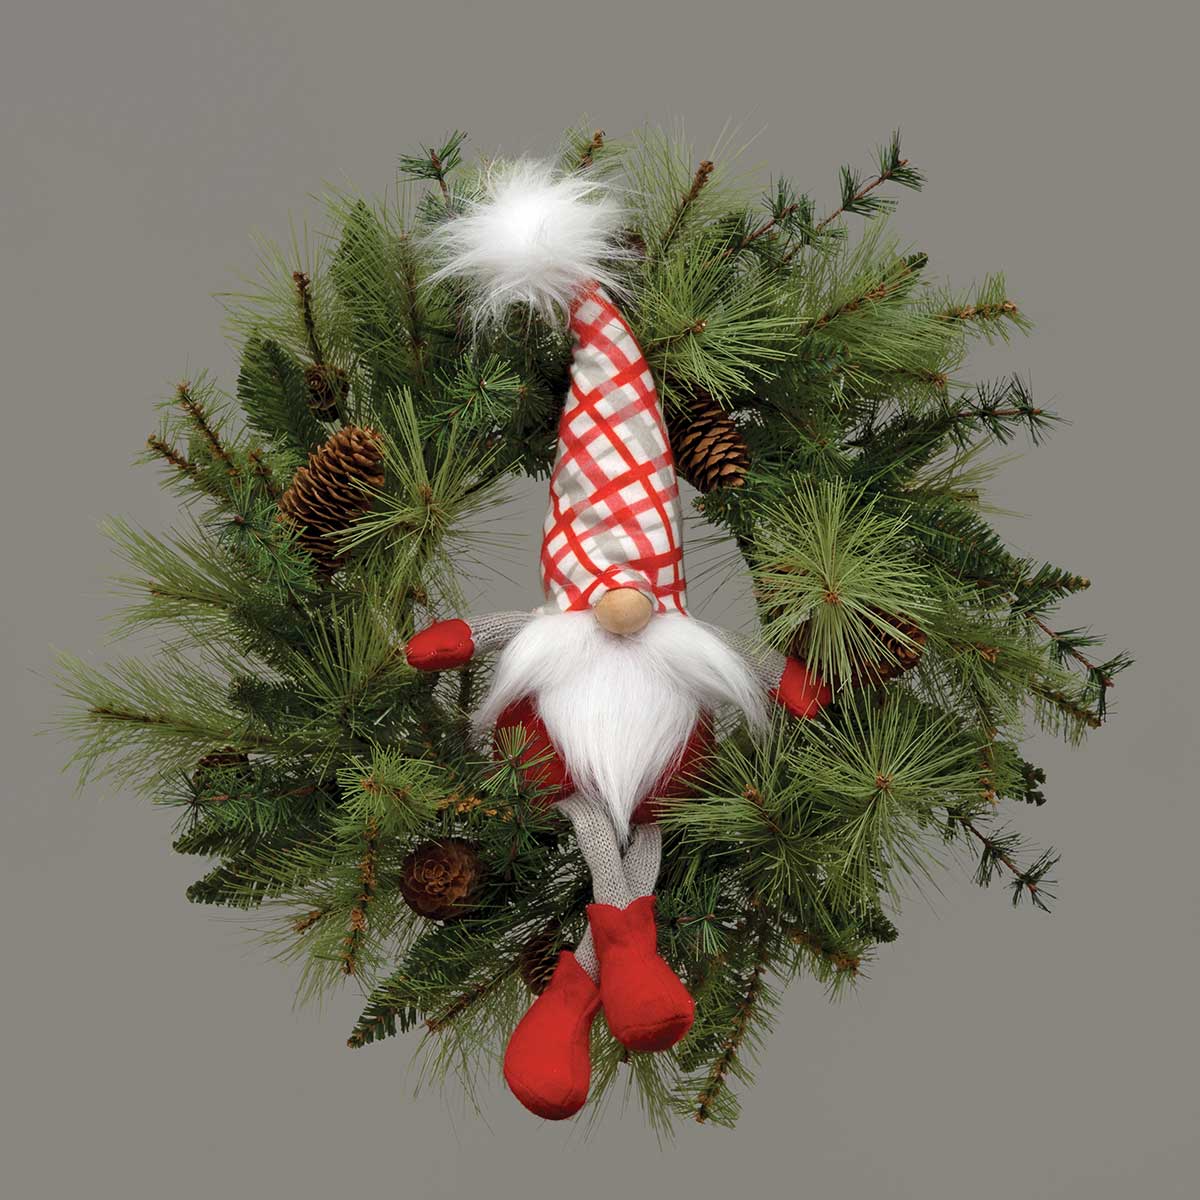 b50 GNOME CHEER WITH FLOPPY LEGS 5.5IN X 4IN X 18IN POLYESTER